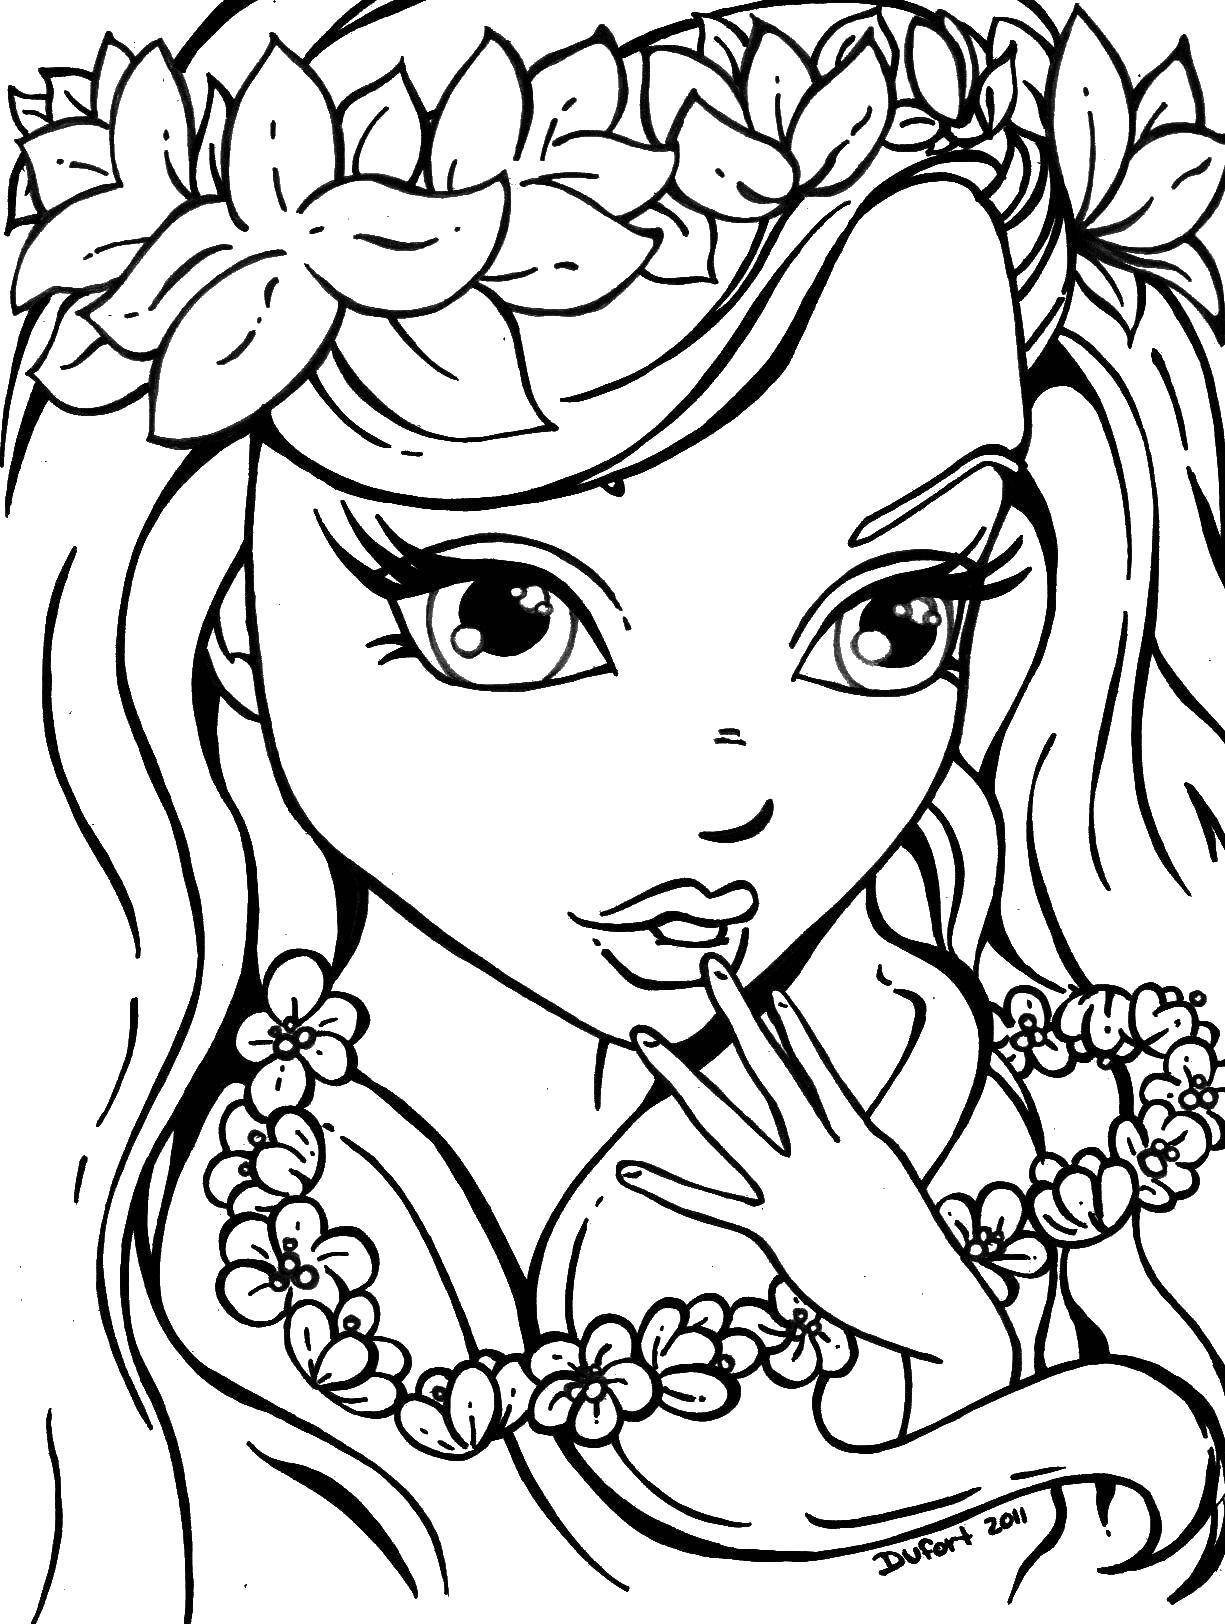 Coloring Girl with wreaths. Category flowers. Tags:  flowers, plants, flowers, wreath.